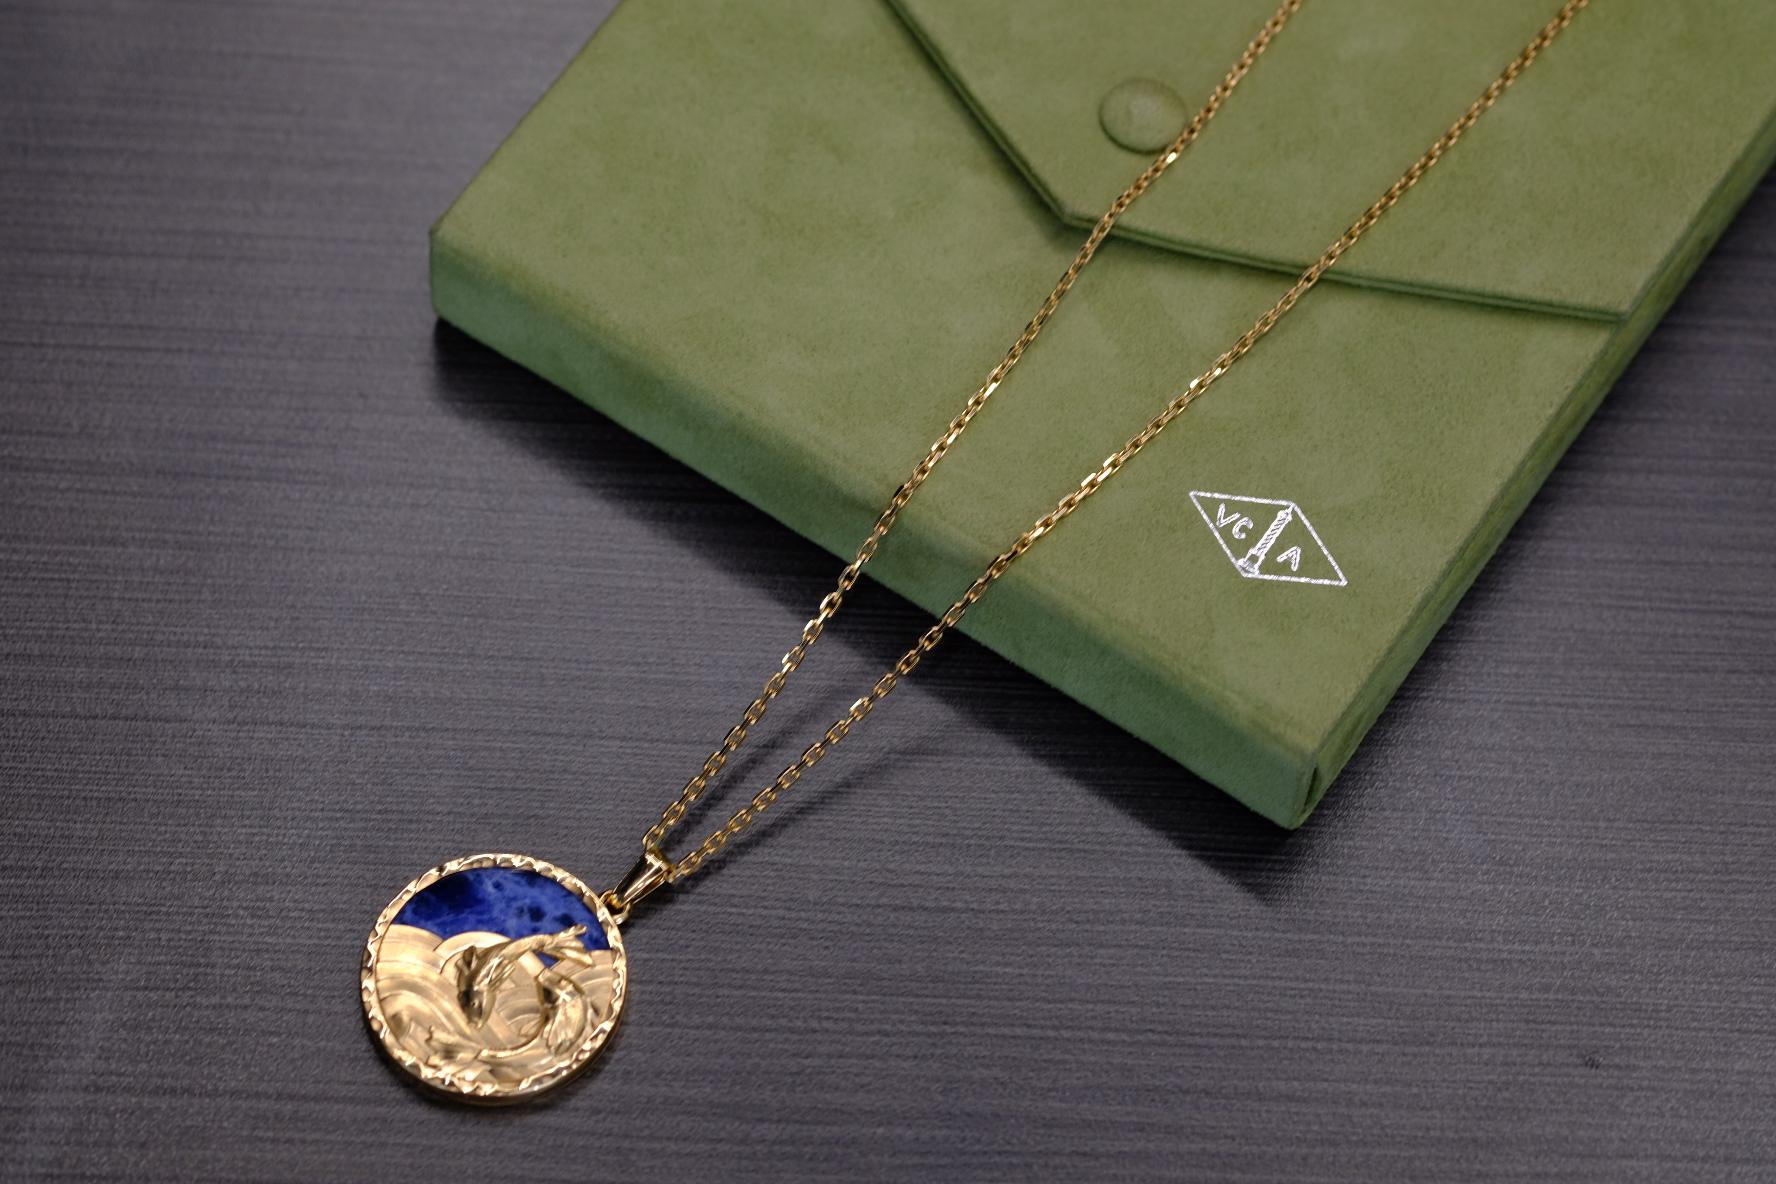 Van Cleef and Arpels Pisces Zodiac Pendant On A Chain Necklace For Sale 2